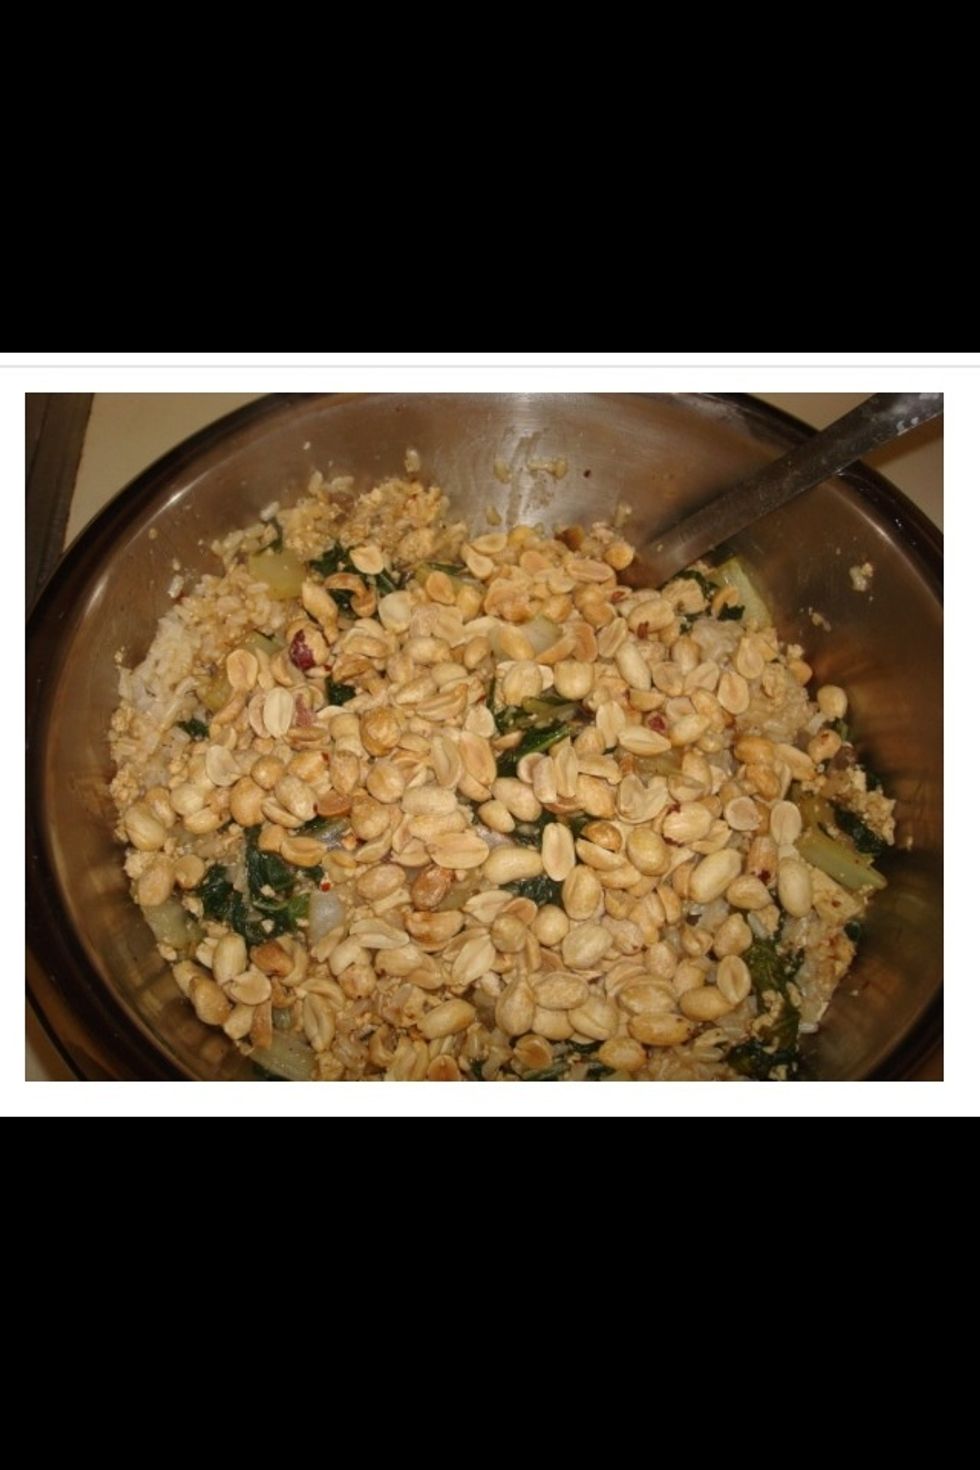 Combine cooked rice and vegetables in a large bowl and mix in about \u00bd cup of peanuts (or to taste).  Mix it all together and serve in individual bowls with low sodium soy sauce.